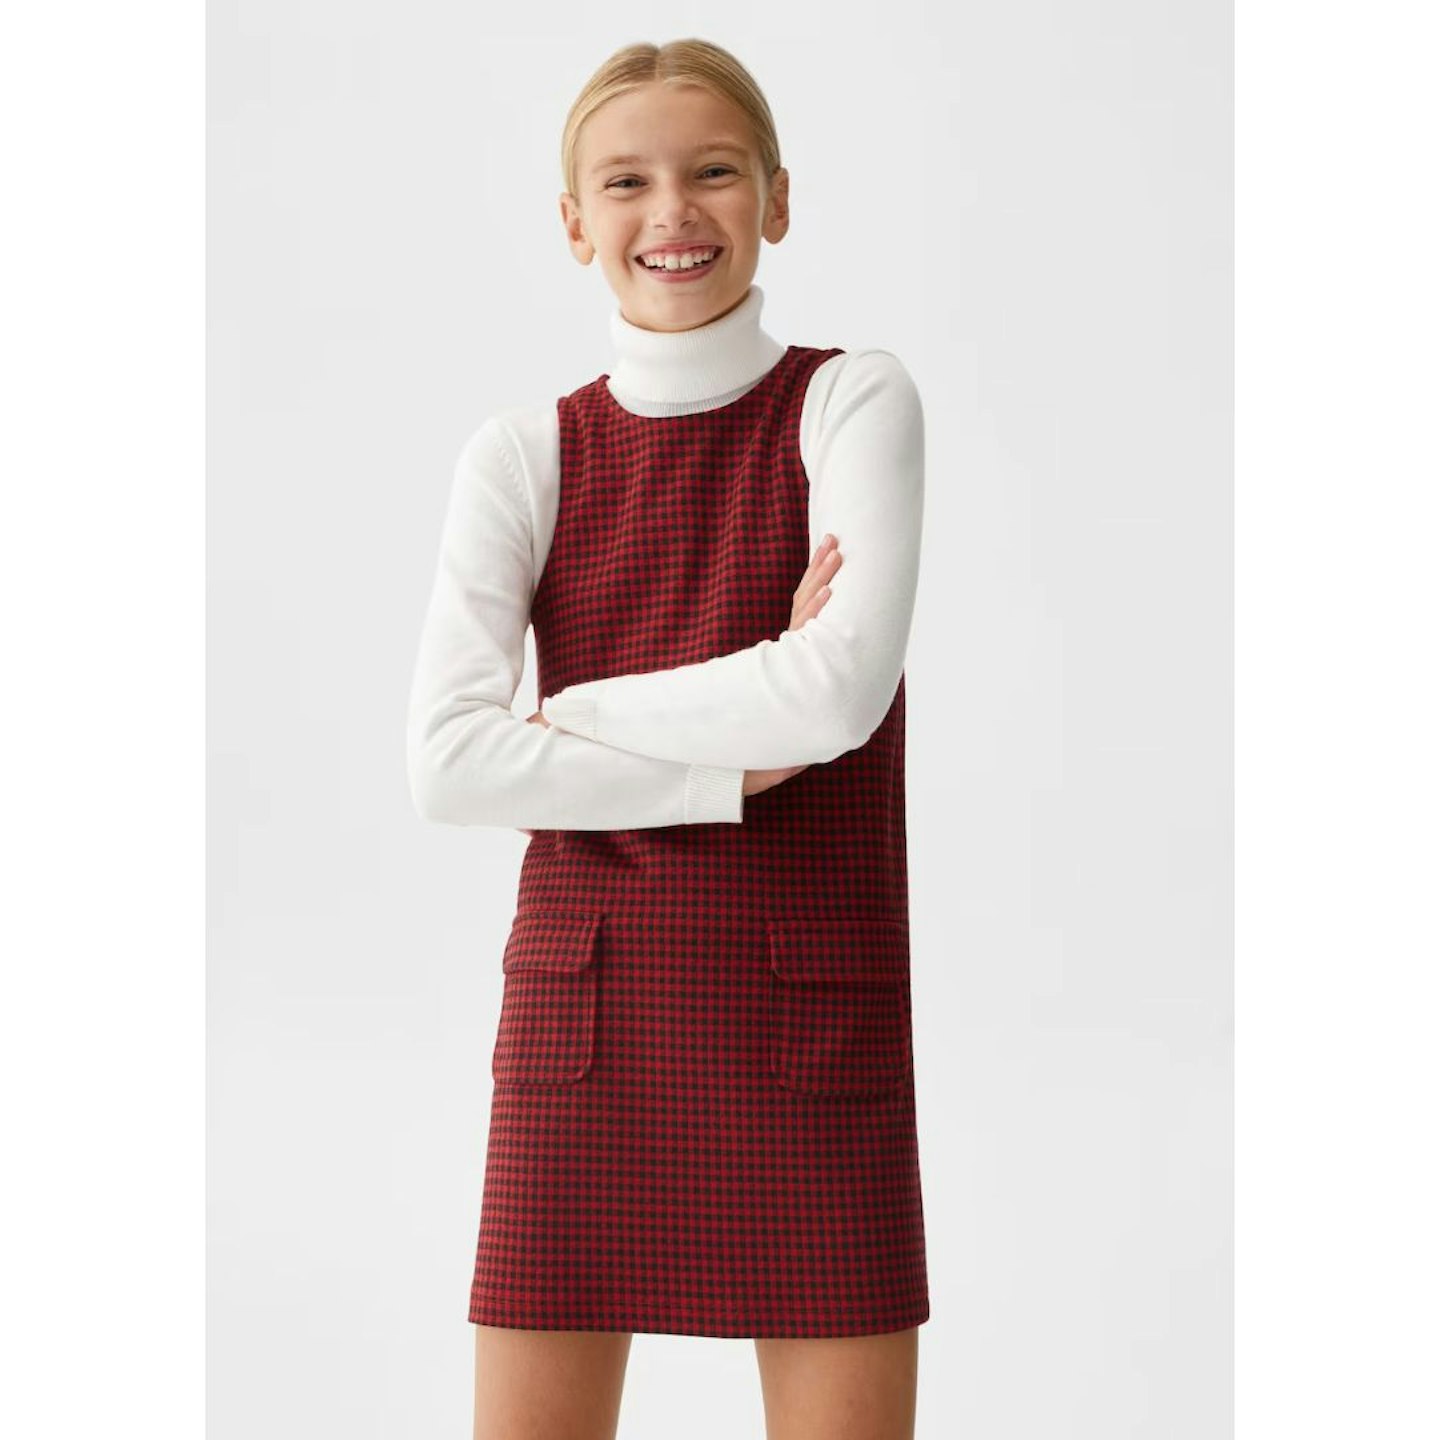 Best Christmas Day Outfits For Kids: Houndstooth pinafore dress